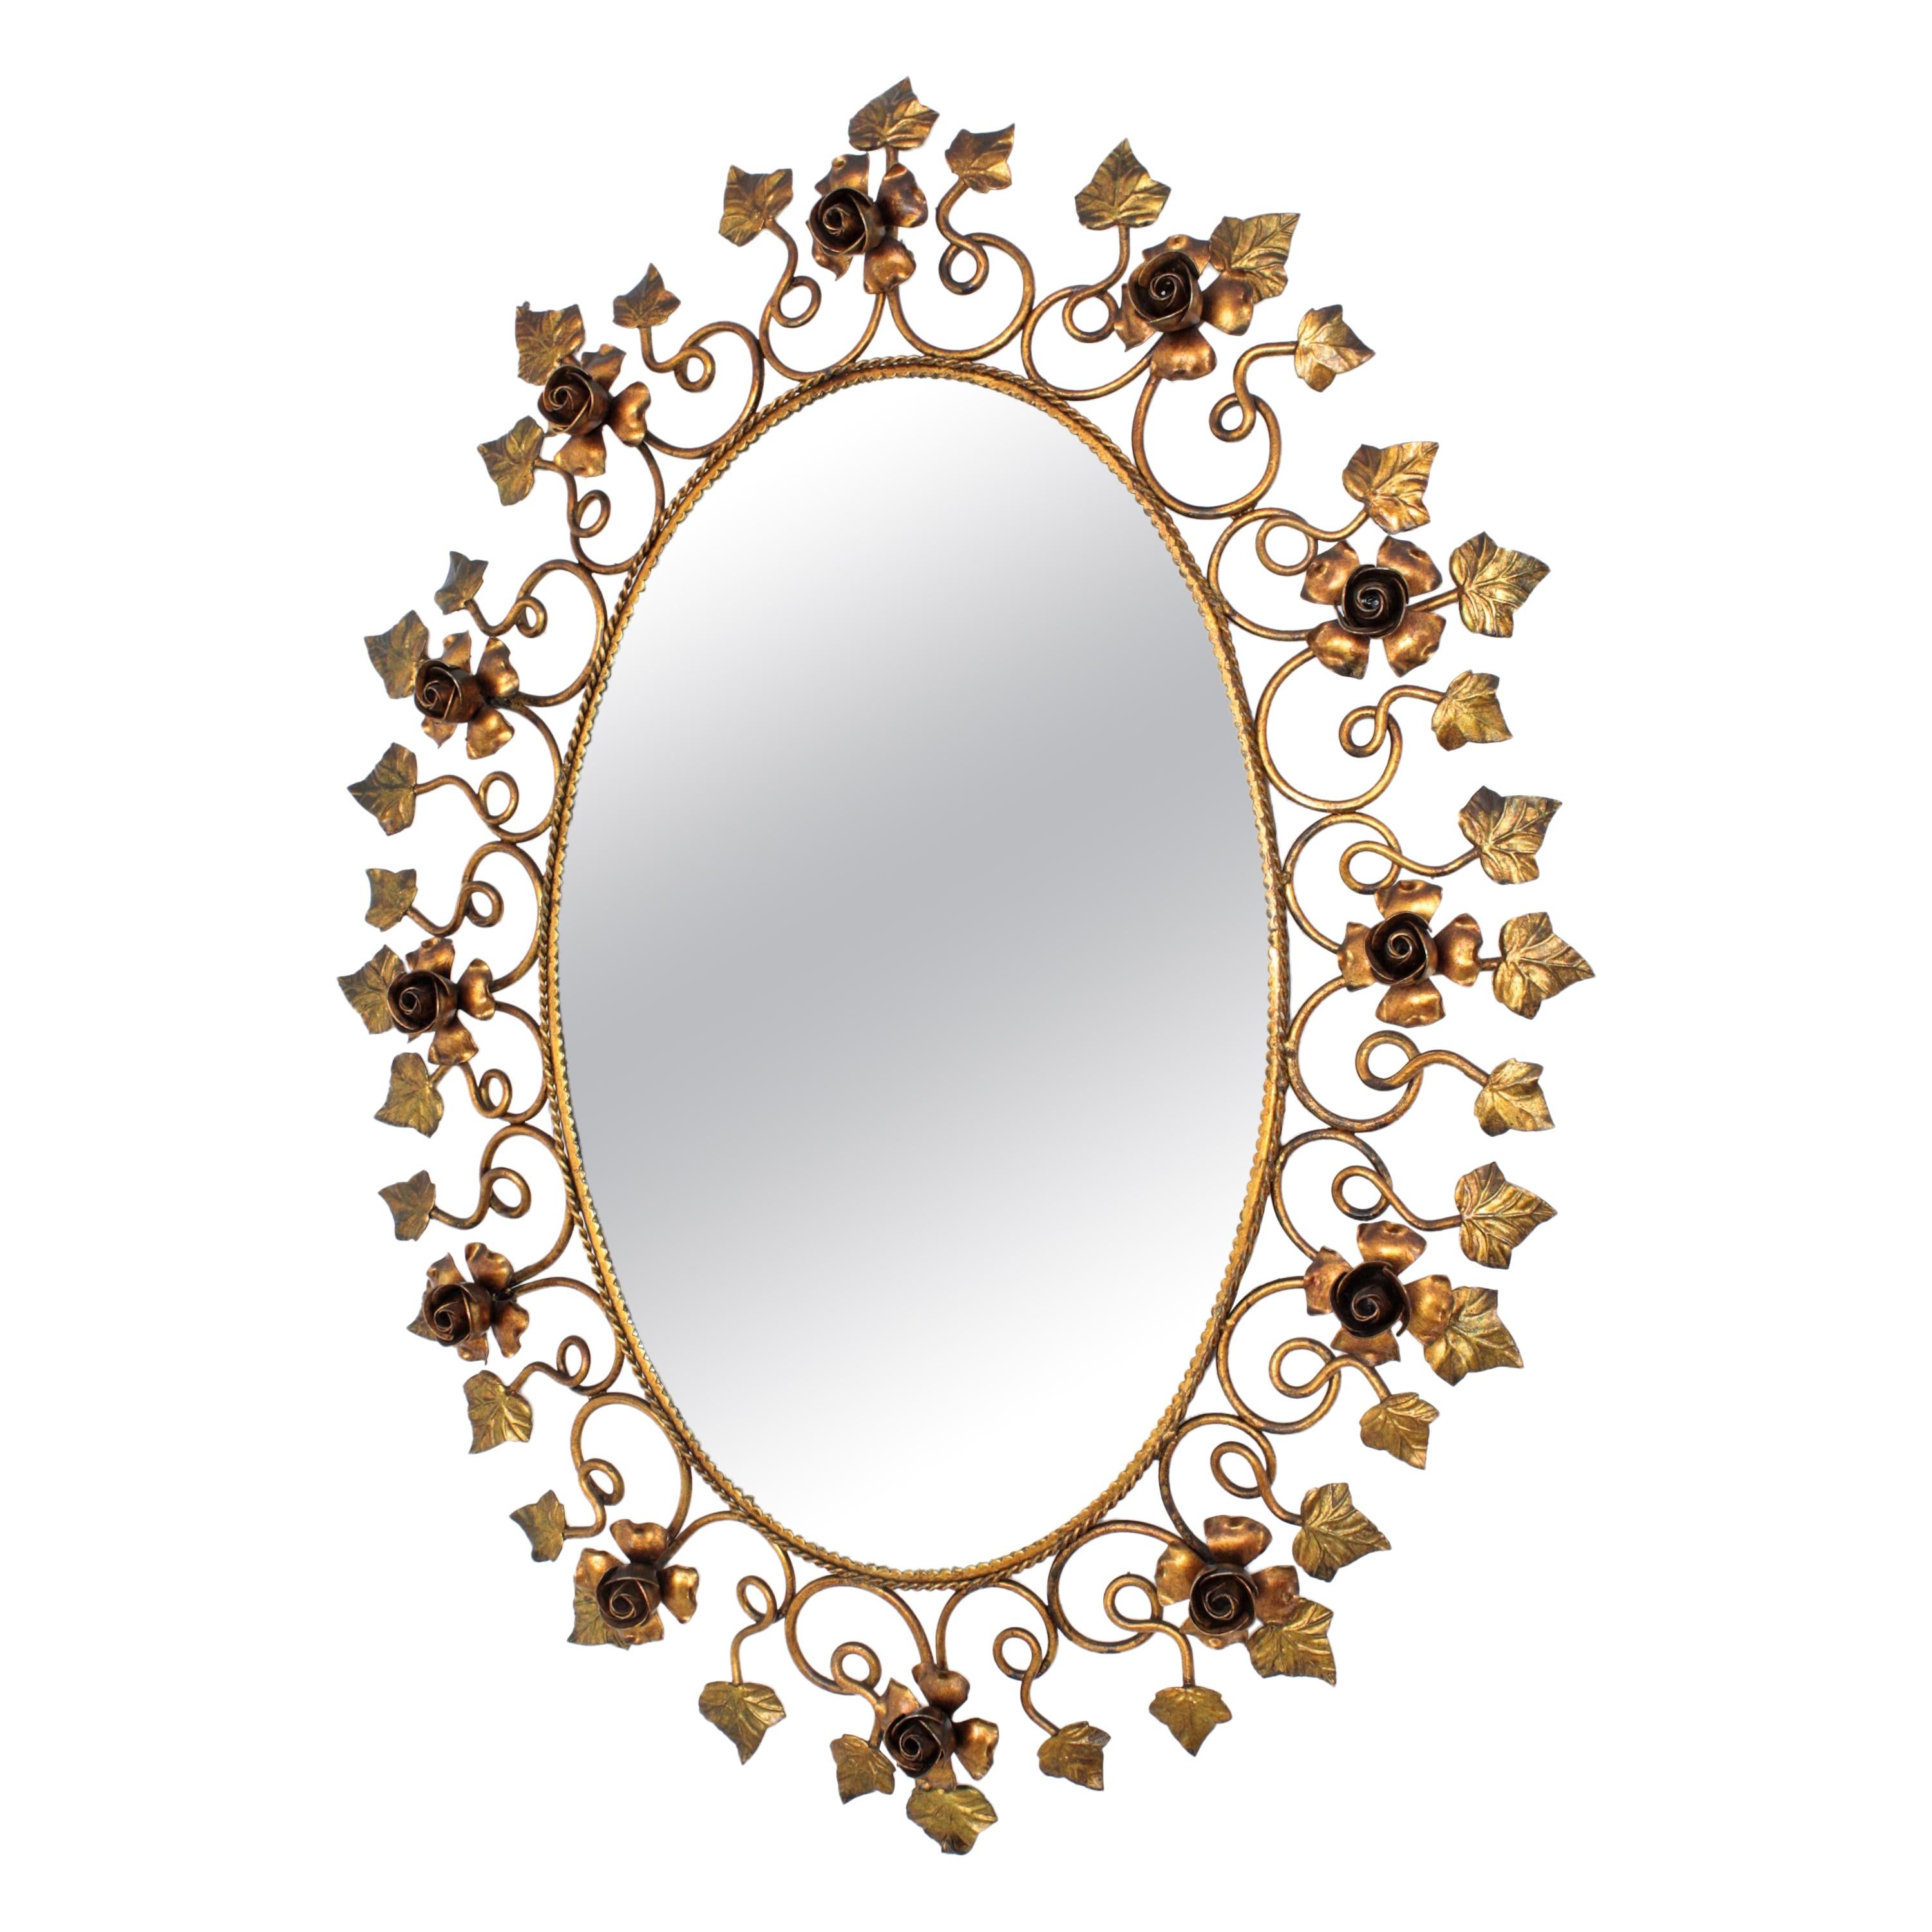 Hollywood Regency gilt iron oval mirror framed by a decoration of roses and leaves, Spain, 1950s.
This mirror has a finely handcrafted work and its detailed frame is highly decorative.
Ot will be a nice addition in a bathroom, dressing room or